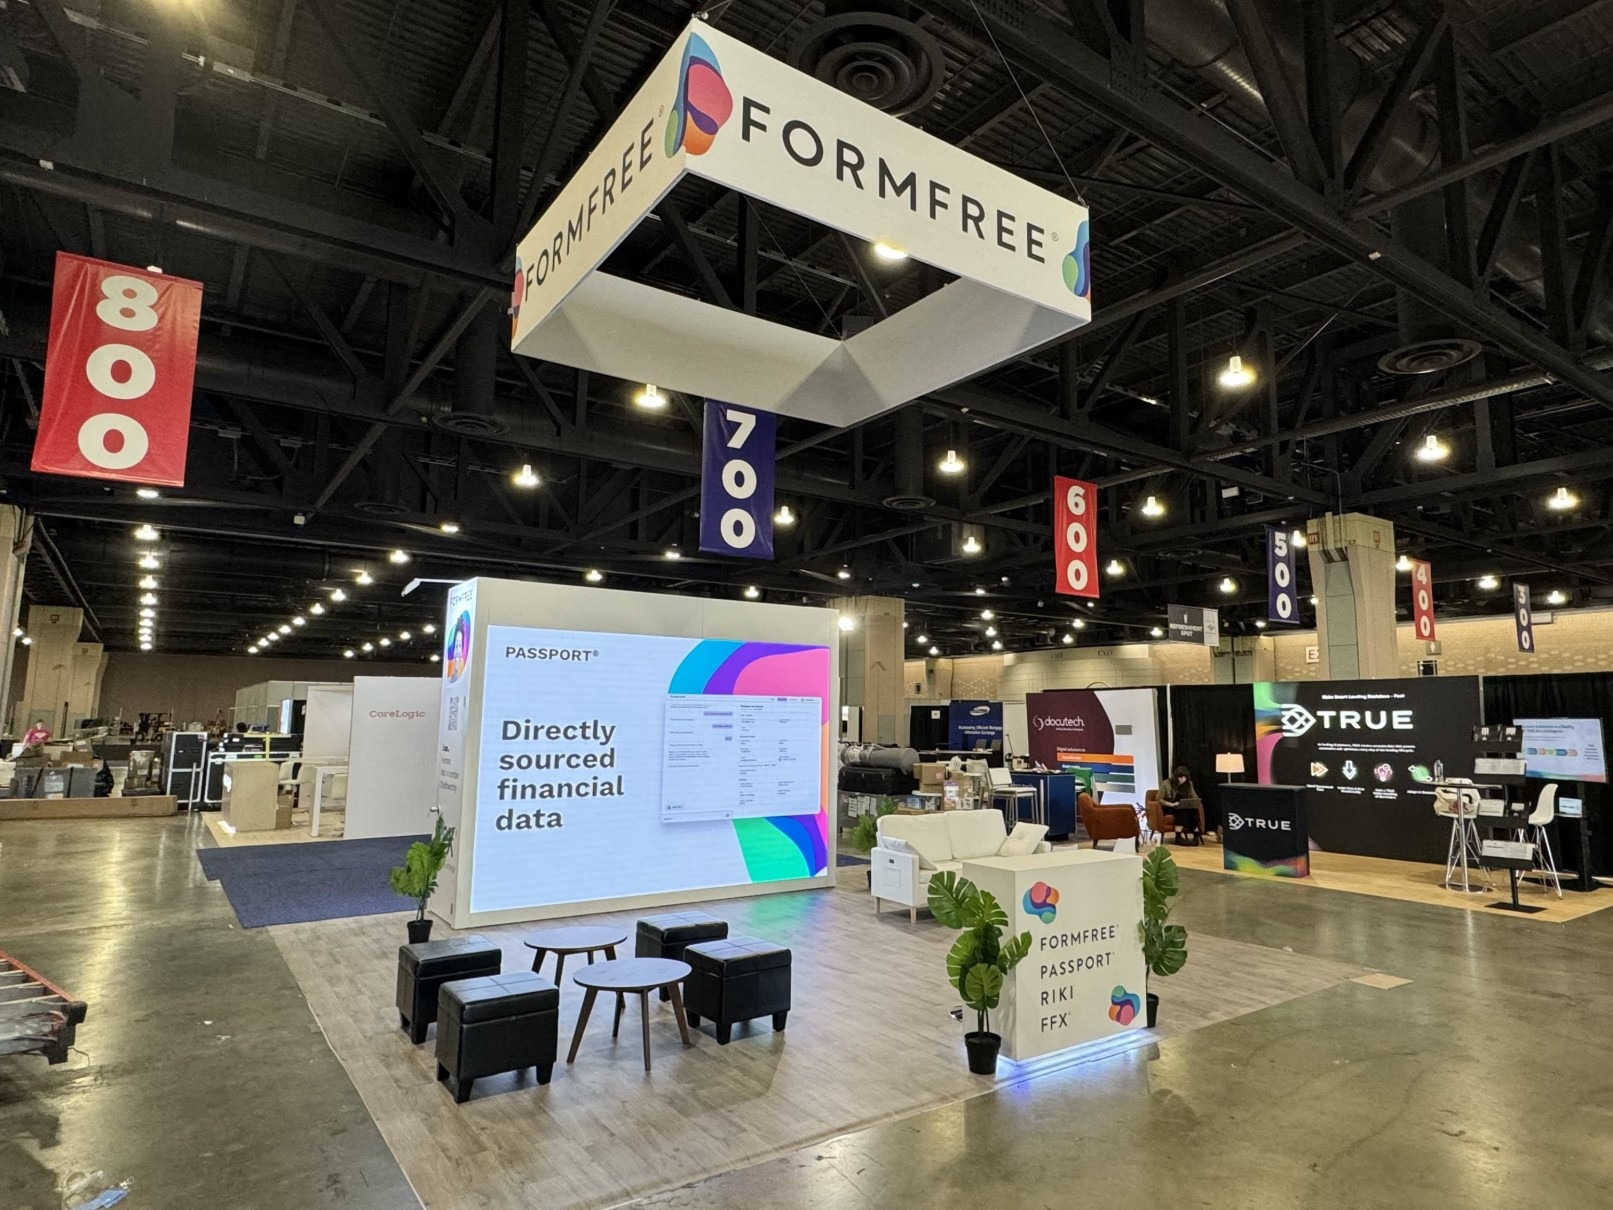 FormFree 20′ x 20′ MBA Conference Philadelphia LED Video Wall Booth Rental